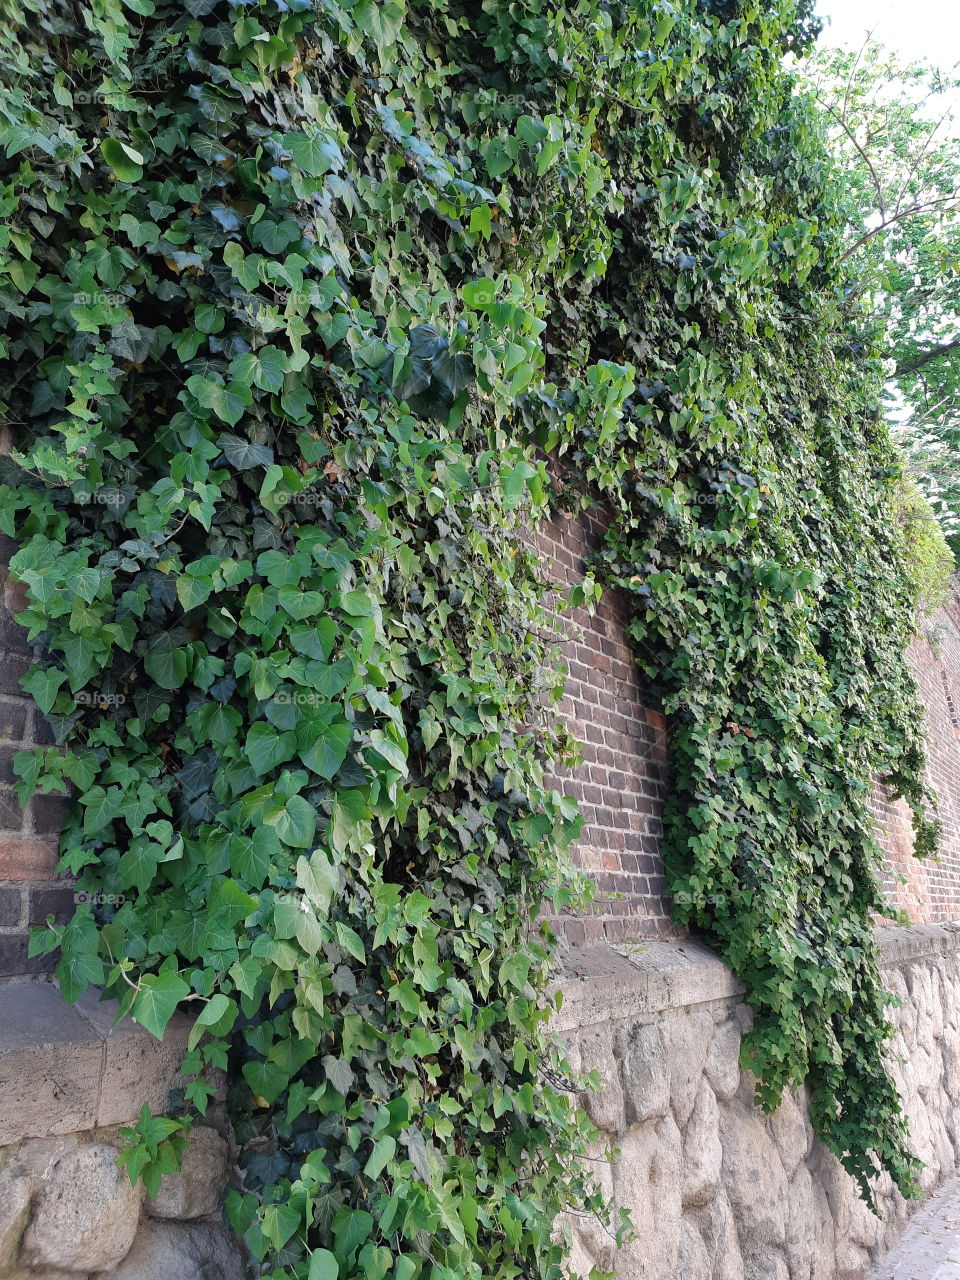 Brick wall and leafs